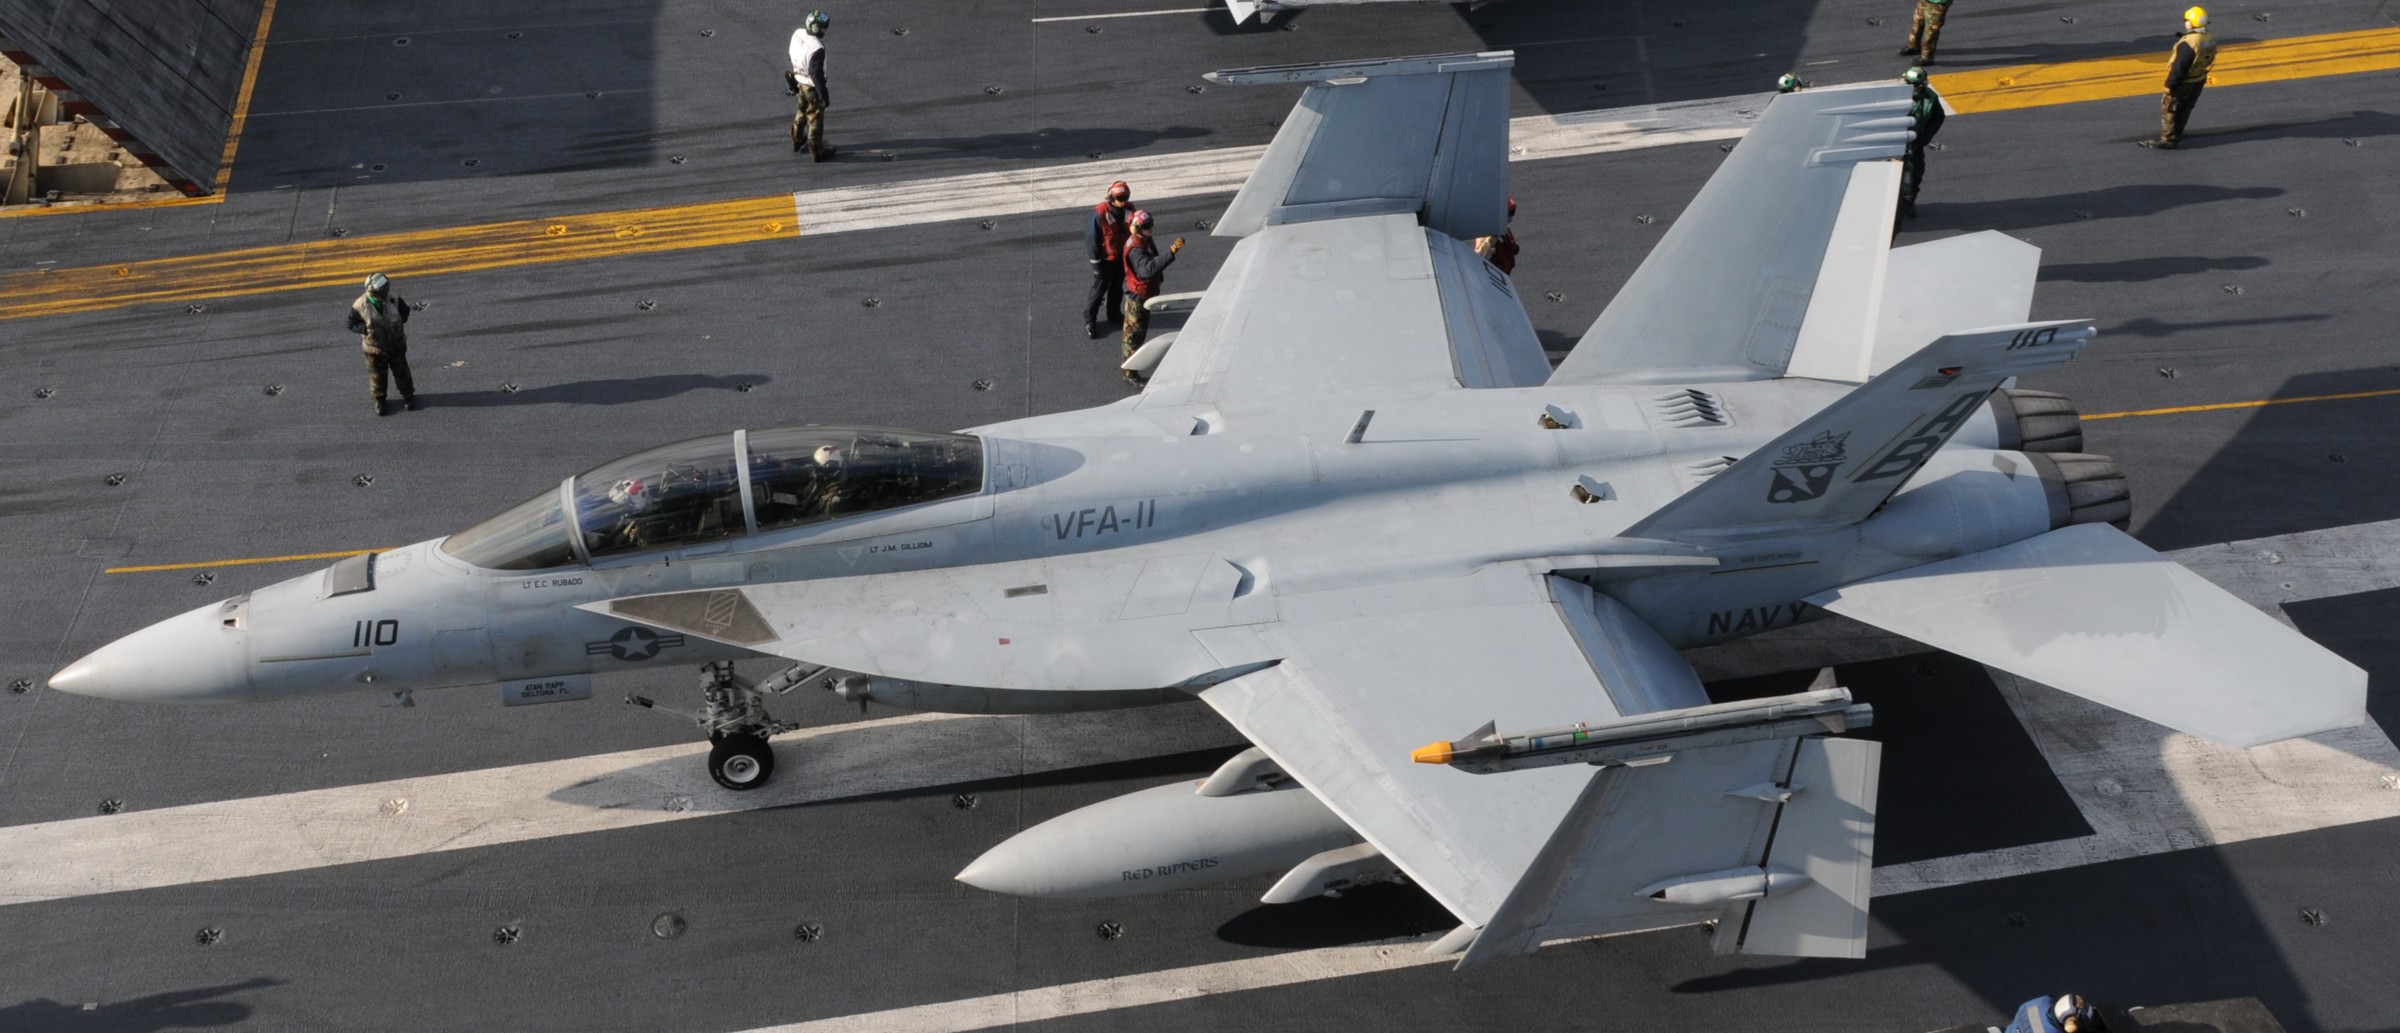 vfa-11 red rippers strike fighter squadron us navy f/a-18f super hornet carrier air wing cvw-1 uss enterprise cvn-65 44